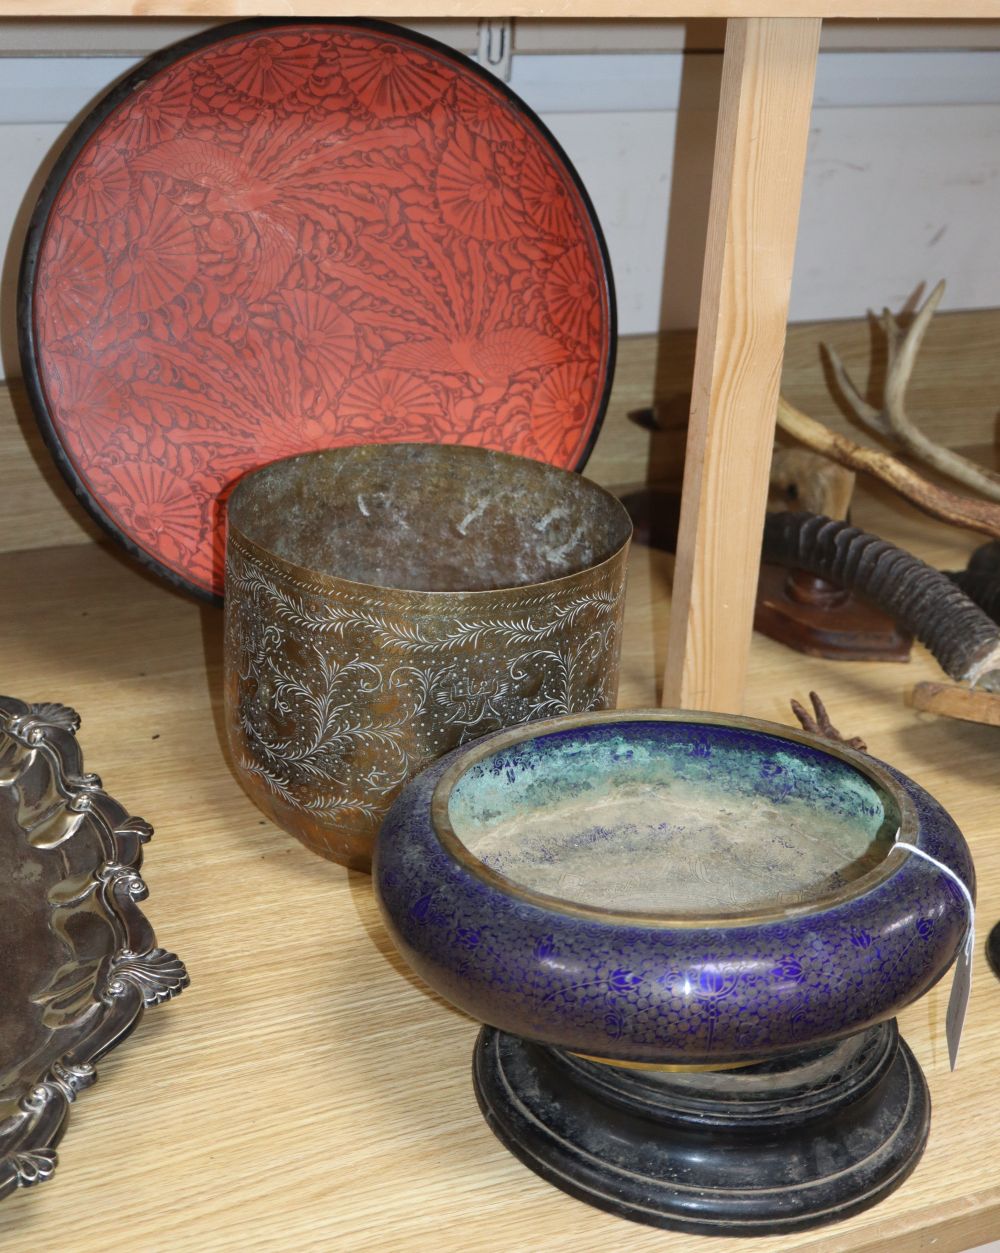 A Chinese cloisonne enamel bowl, a Burmese lacquer dish and an Indian brass bowl